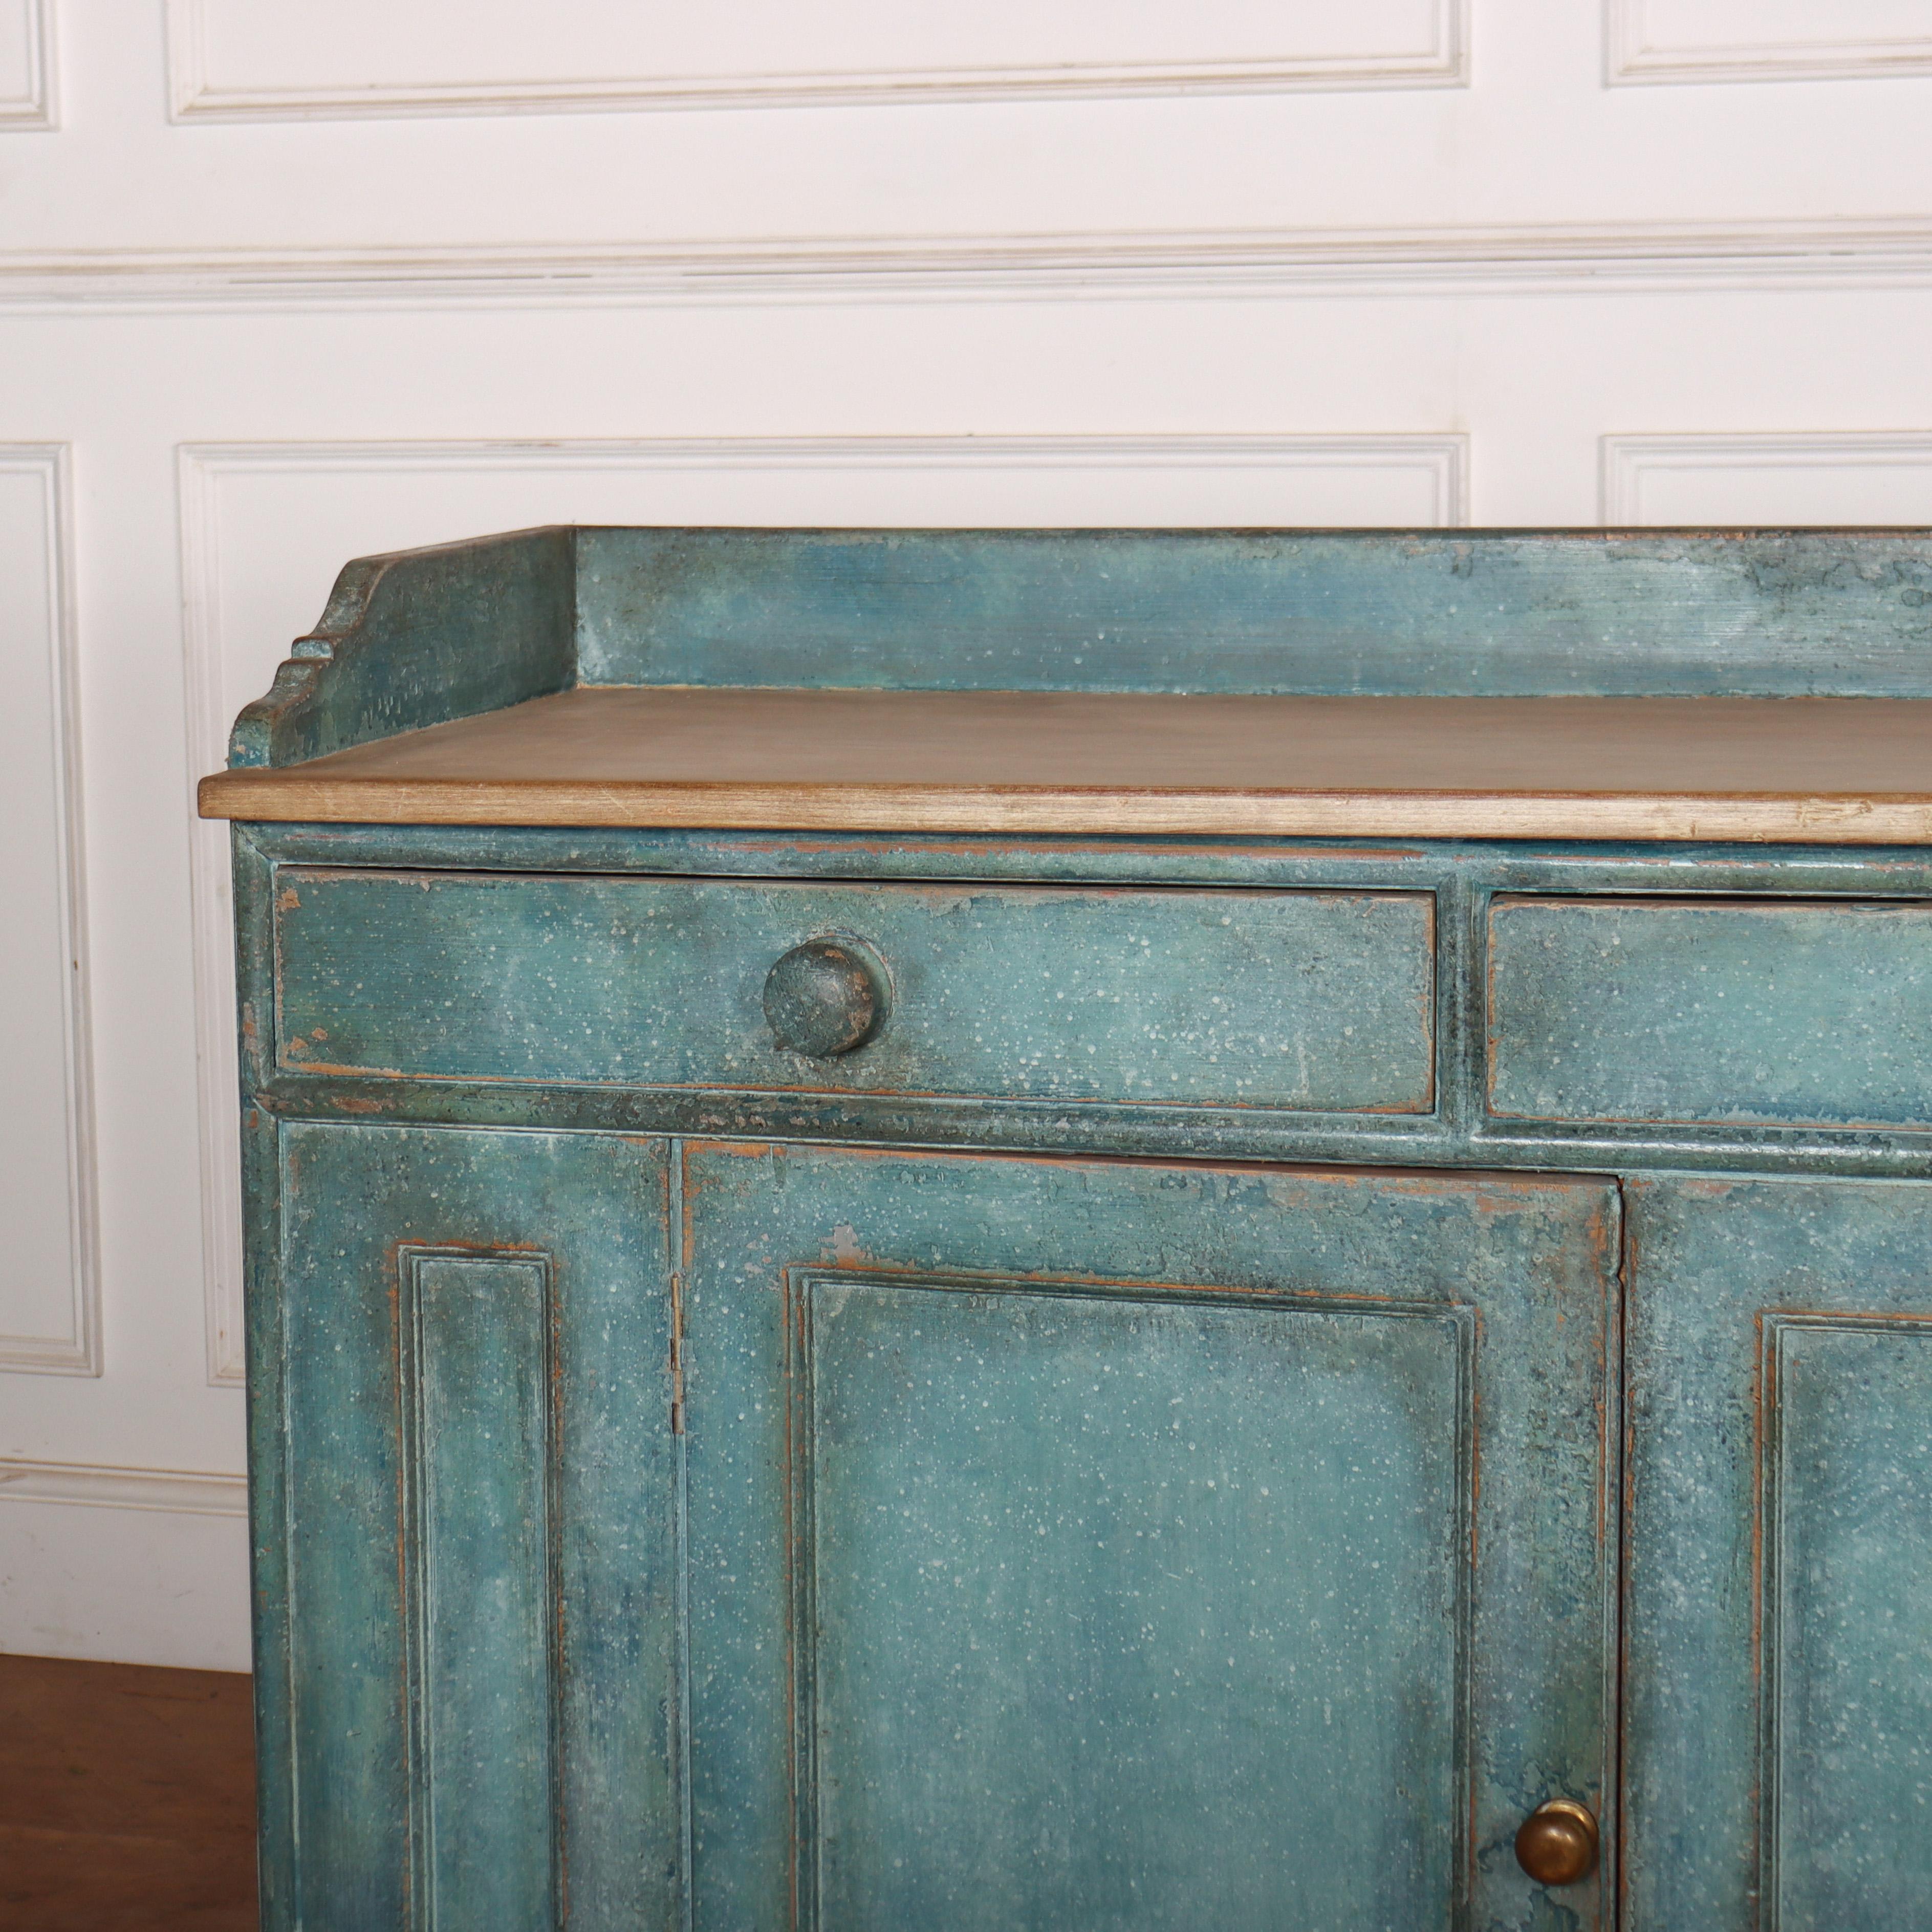 19th C Scottish dairy dresser base with a low upstand around a scrubbed pine top. 1840.

37